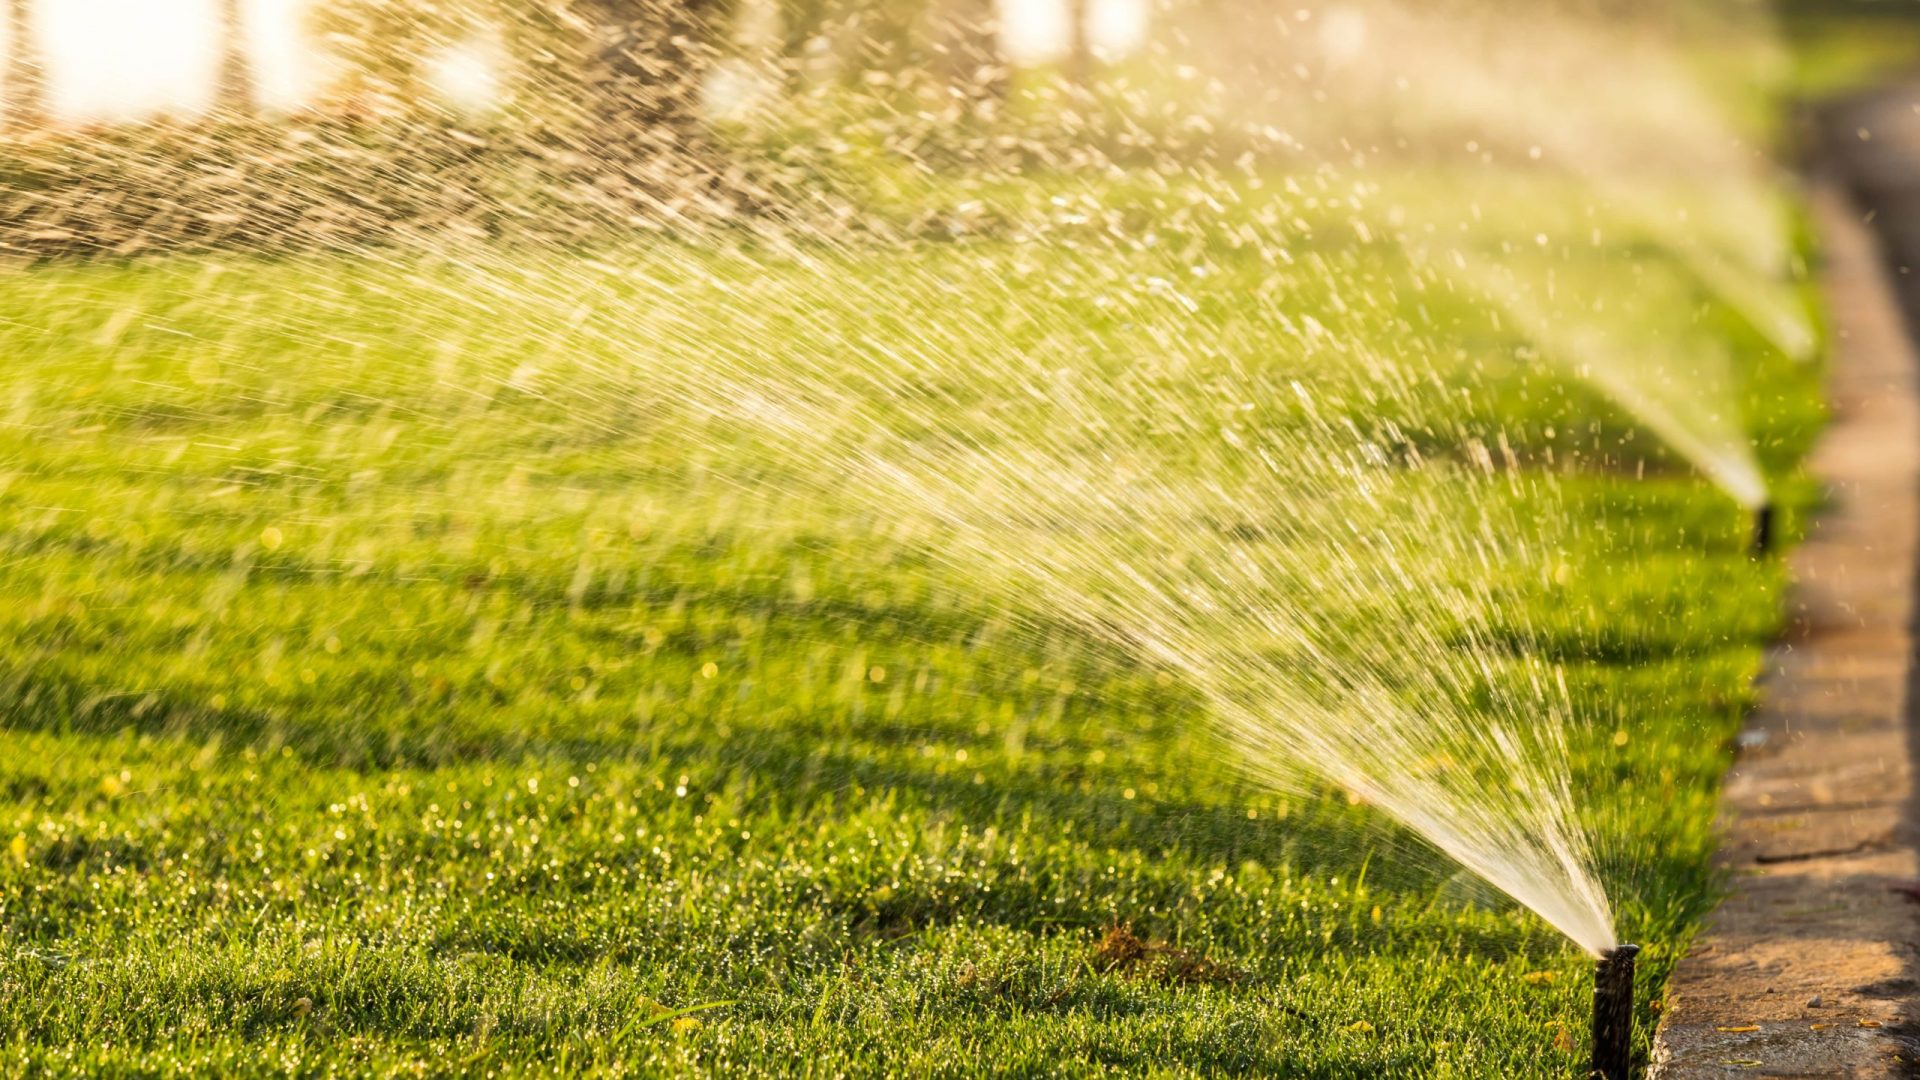 Tampa lawn care tips for winter